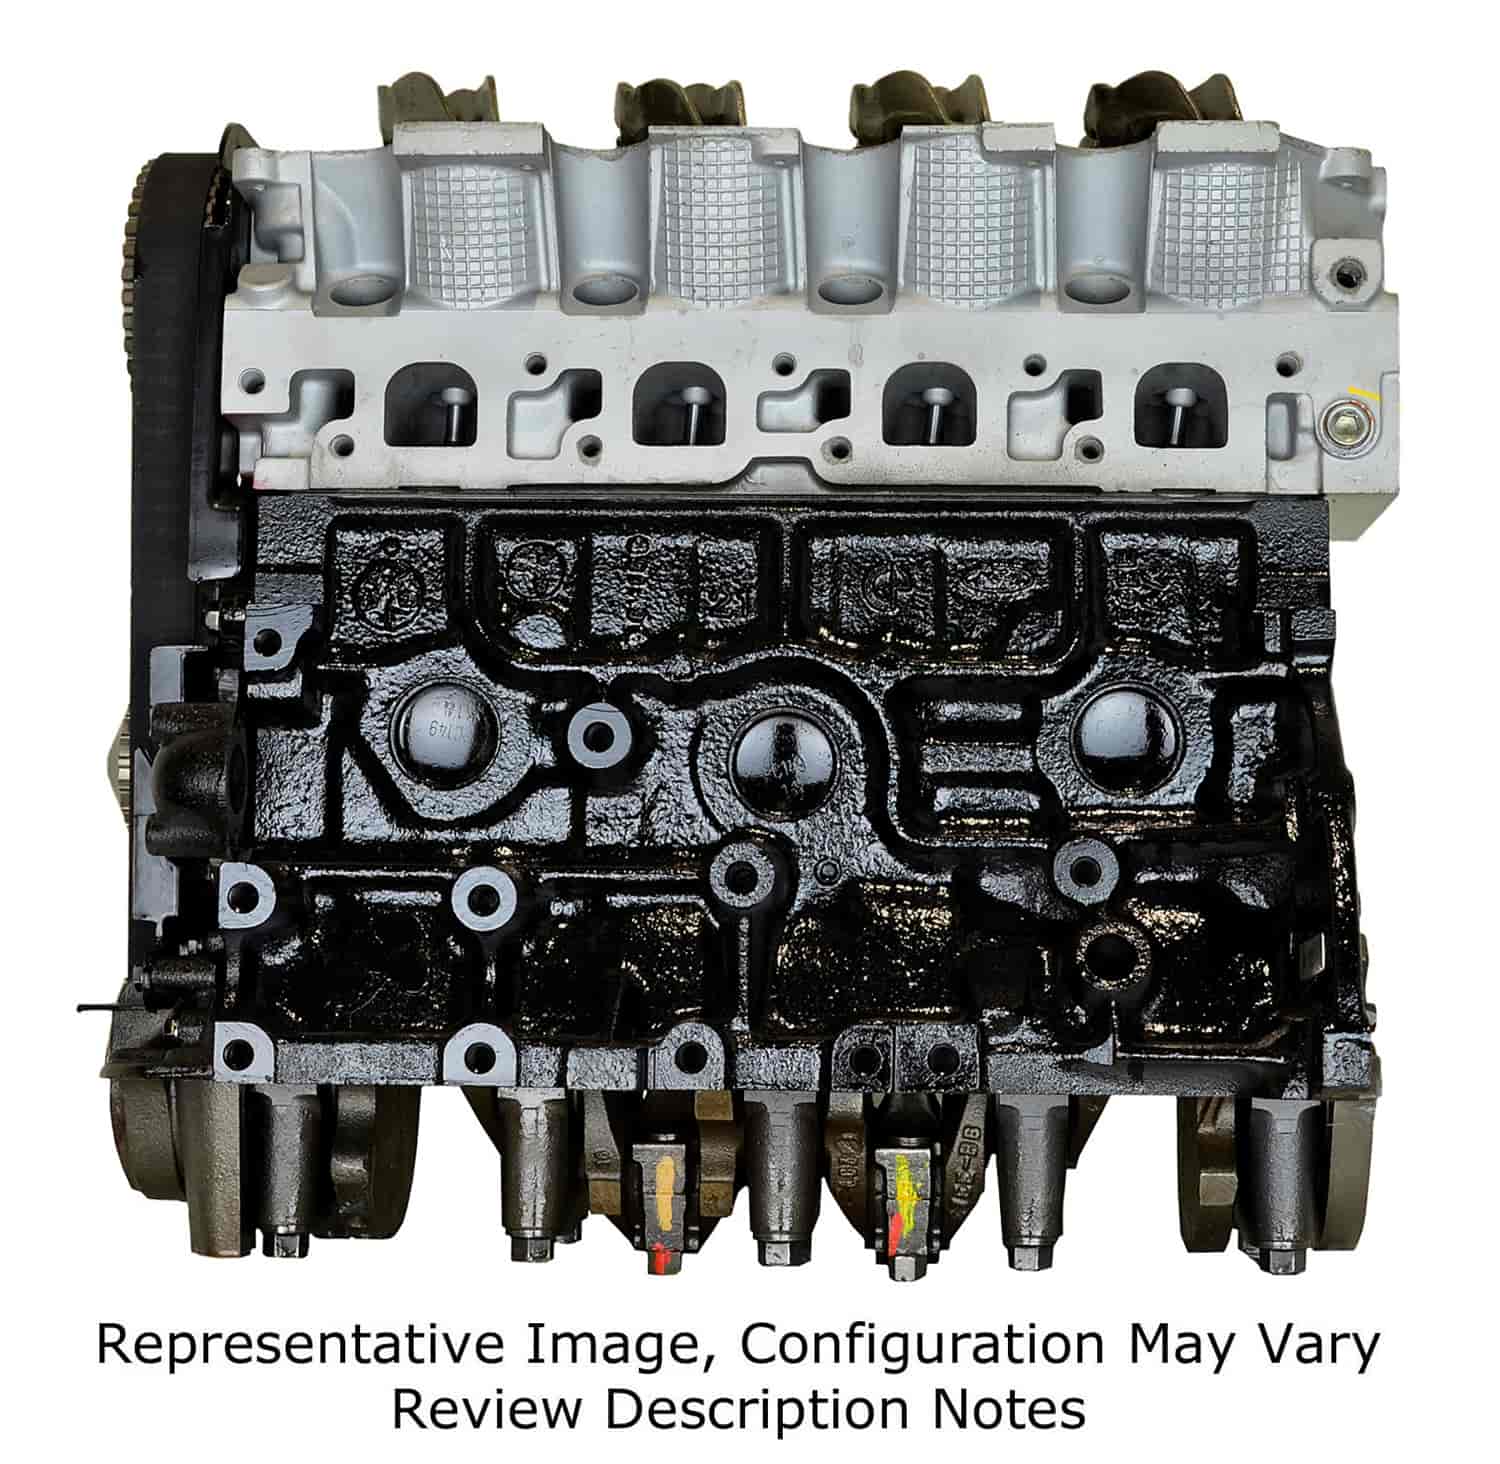 Remanufactured Crate Engine for 1987-1990 Ford EXP & Escort with 1.9L L4